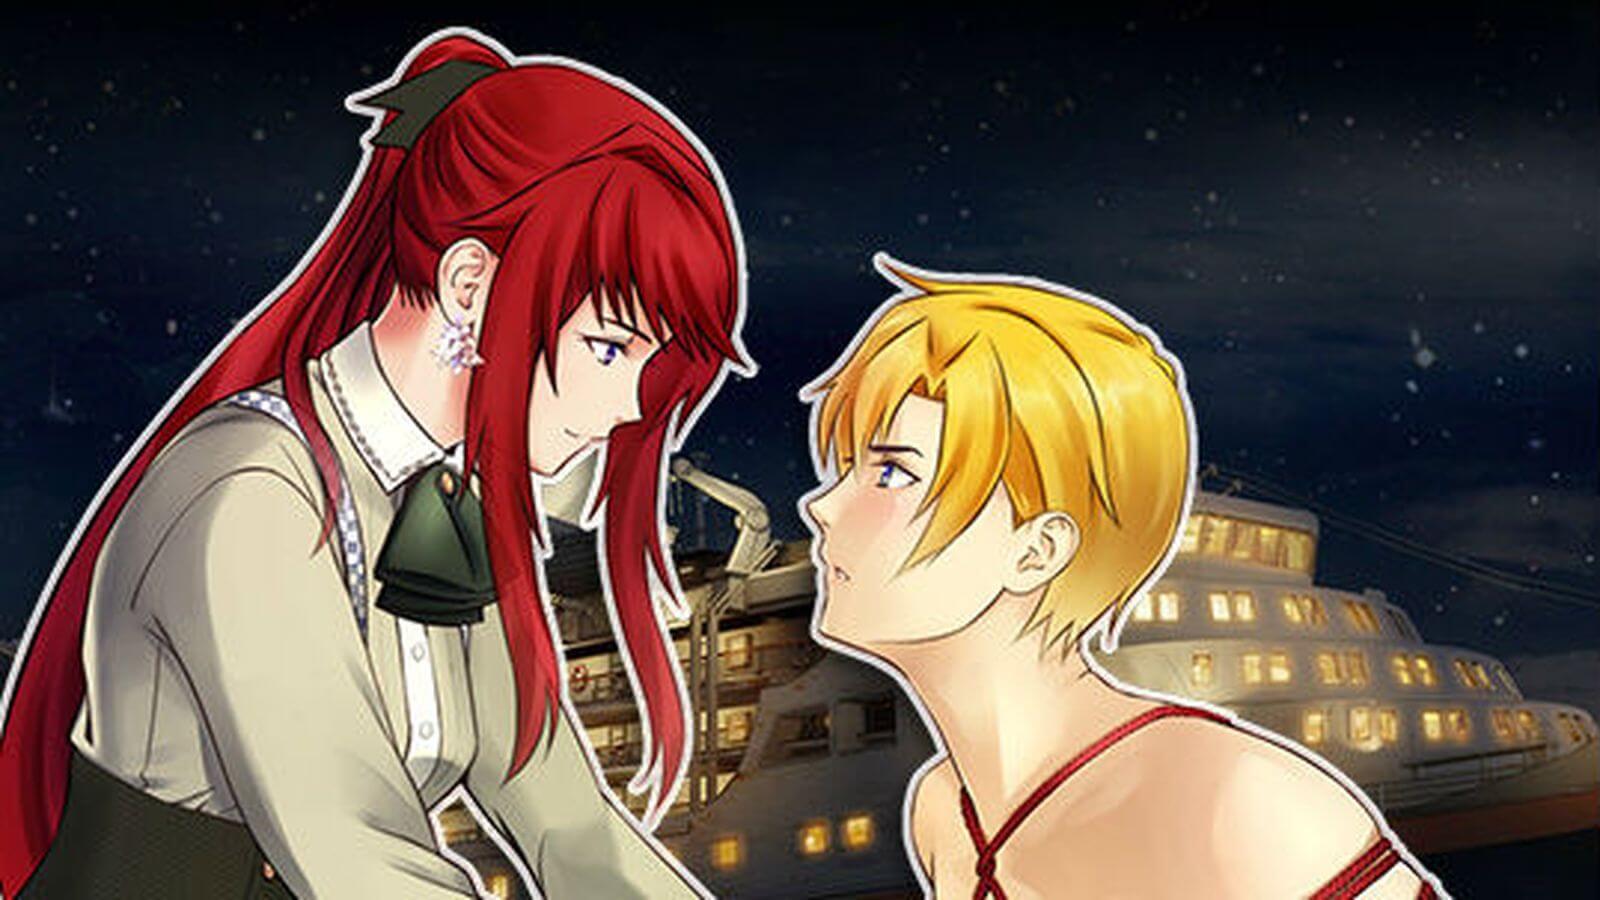 Two characters in the game Lady Killer in a Bind stare at each other with anger.